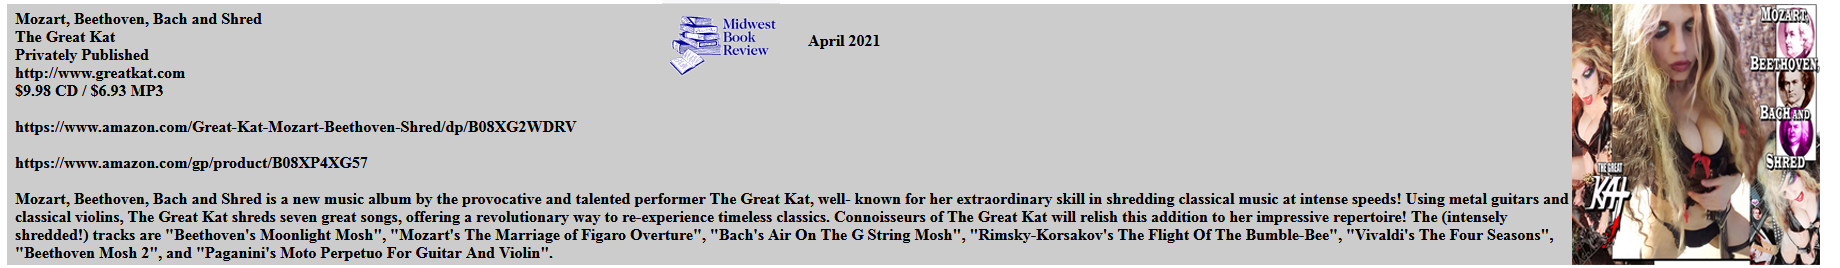 MIDWEST BOOK REVIEW: Wisconsin Bookwatch" RAVE REVIEWS OF THE GREAT KAT CDS!